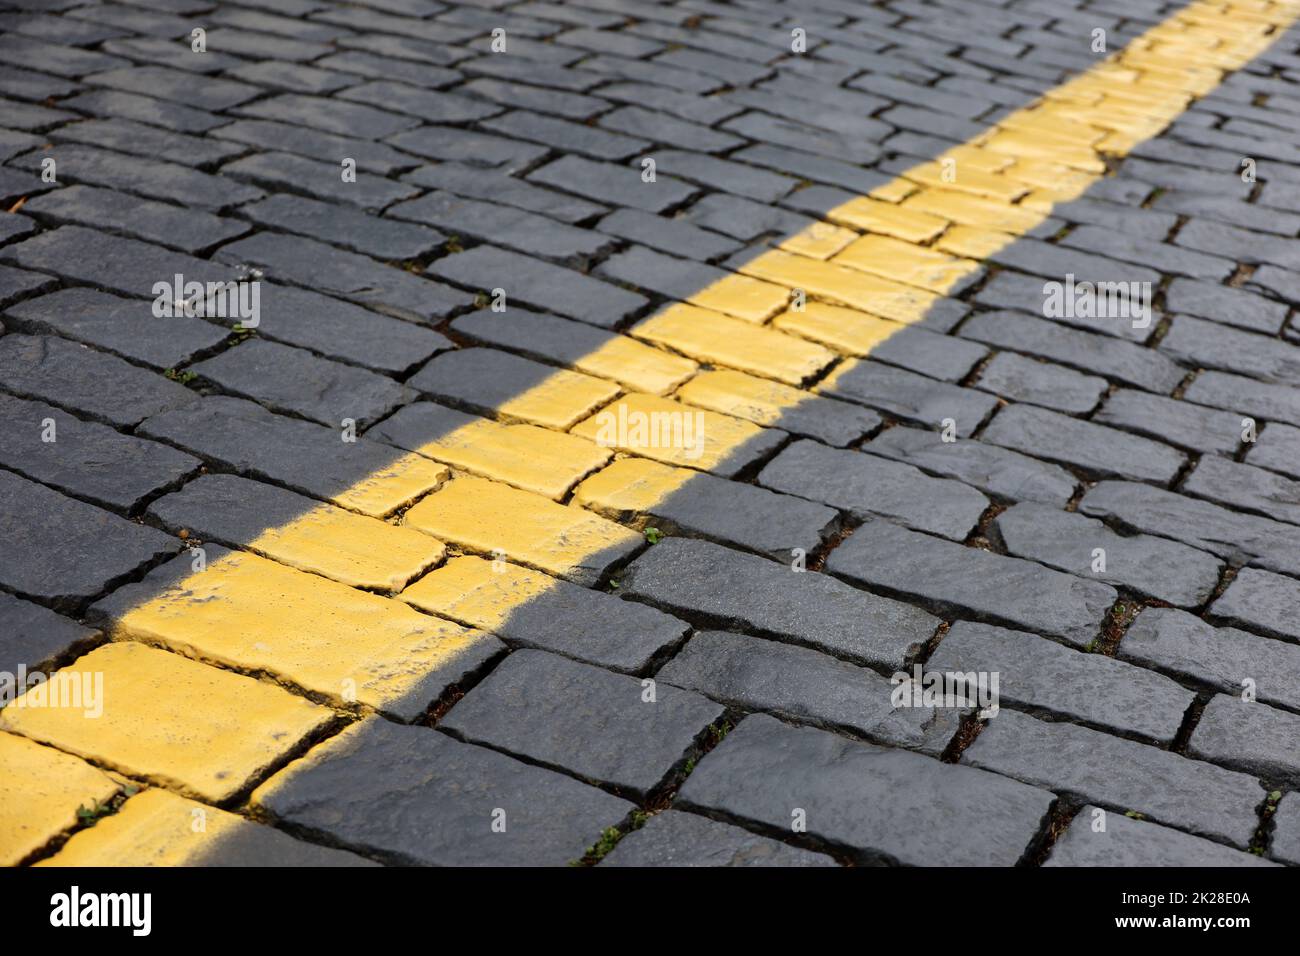 Stone pavement texture, cobbled street. Road marking, yellow line on tiles Stock Photo